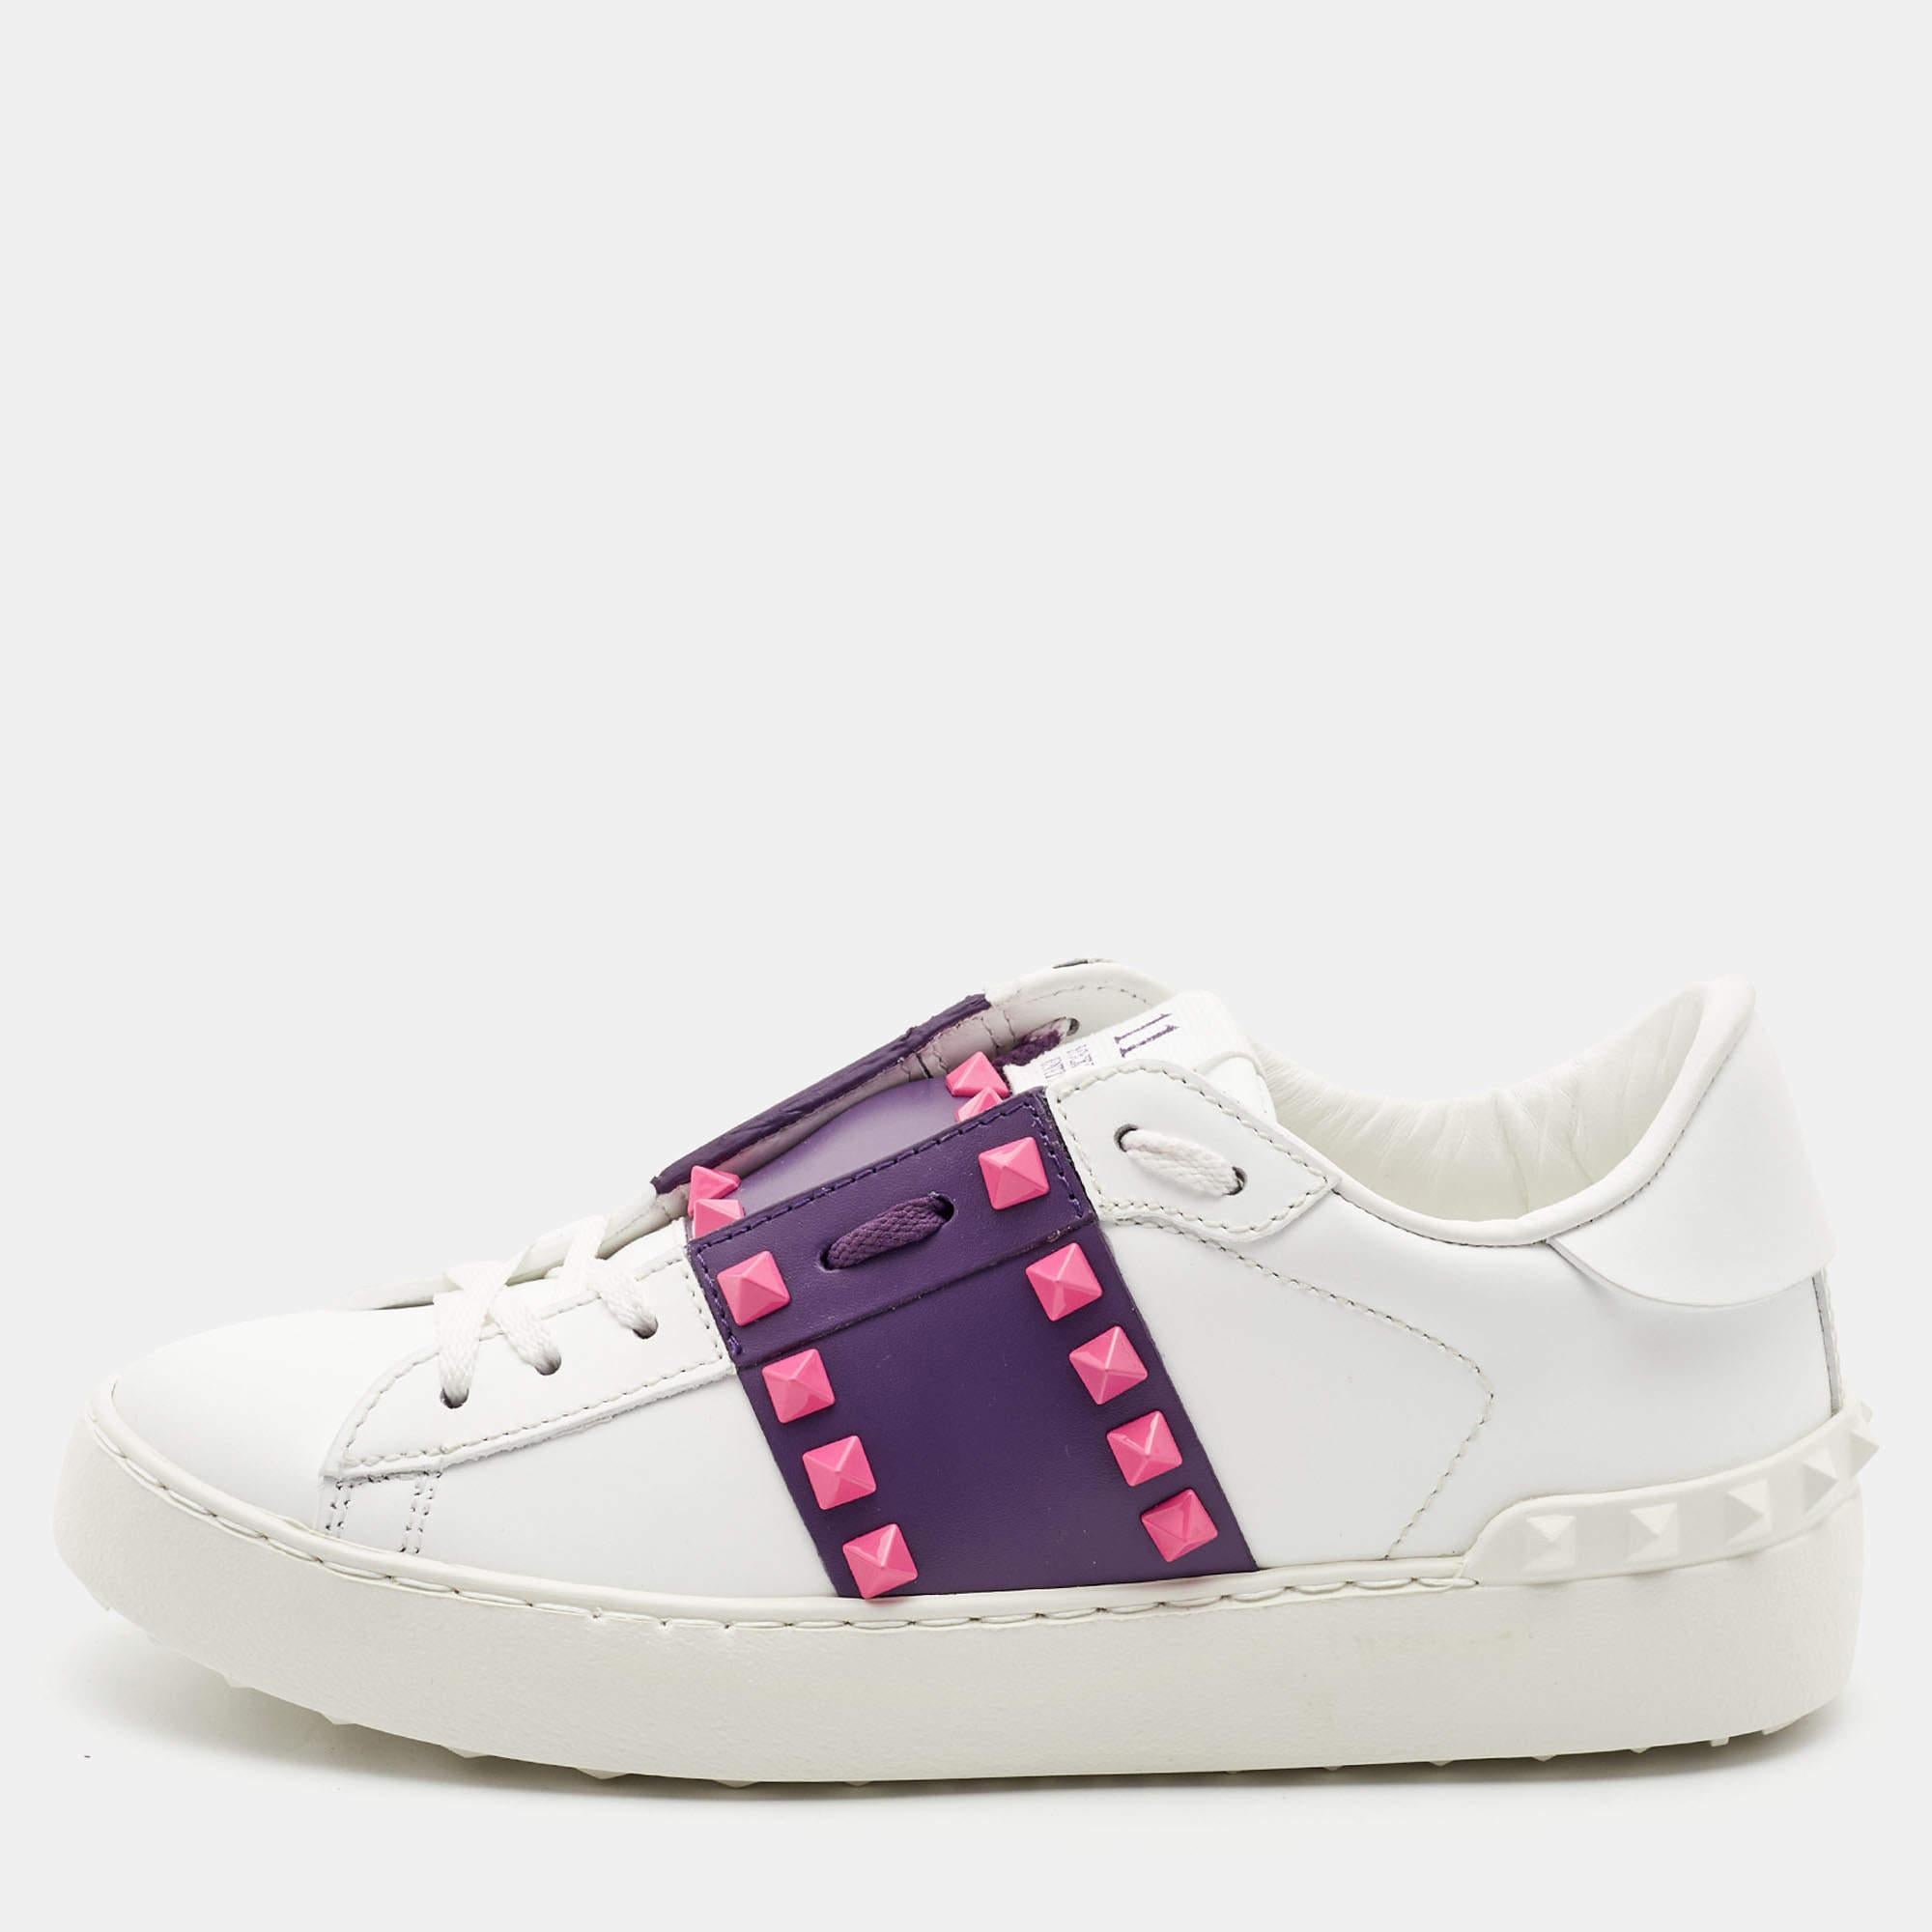 Valentino White/Purple Leather Rockstud Low Top Sneakers Size 35.5 4